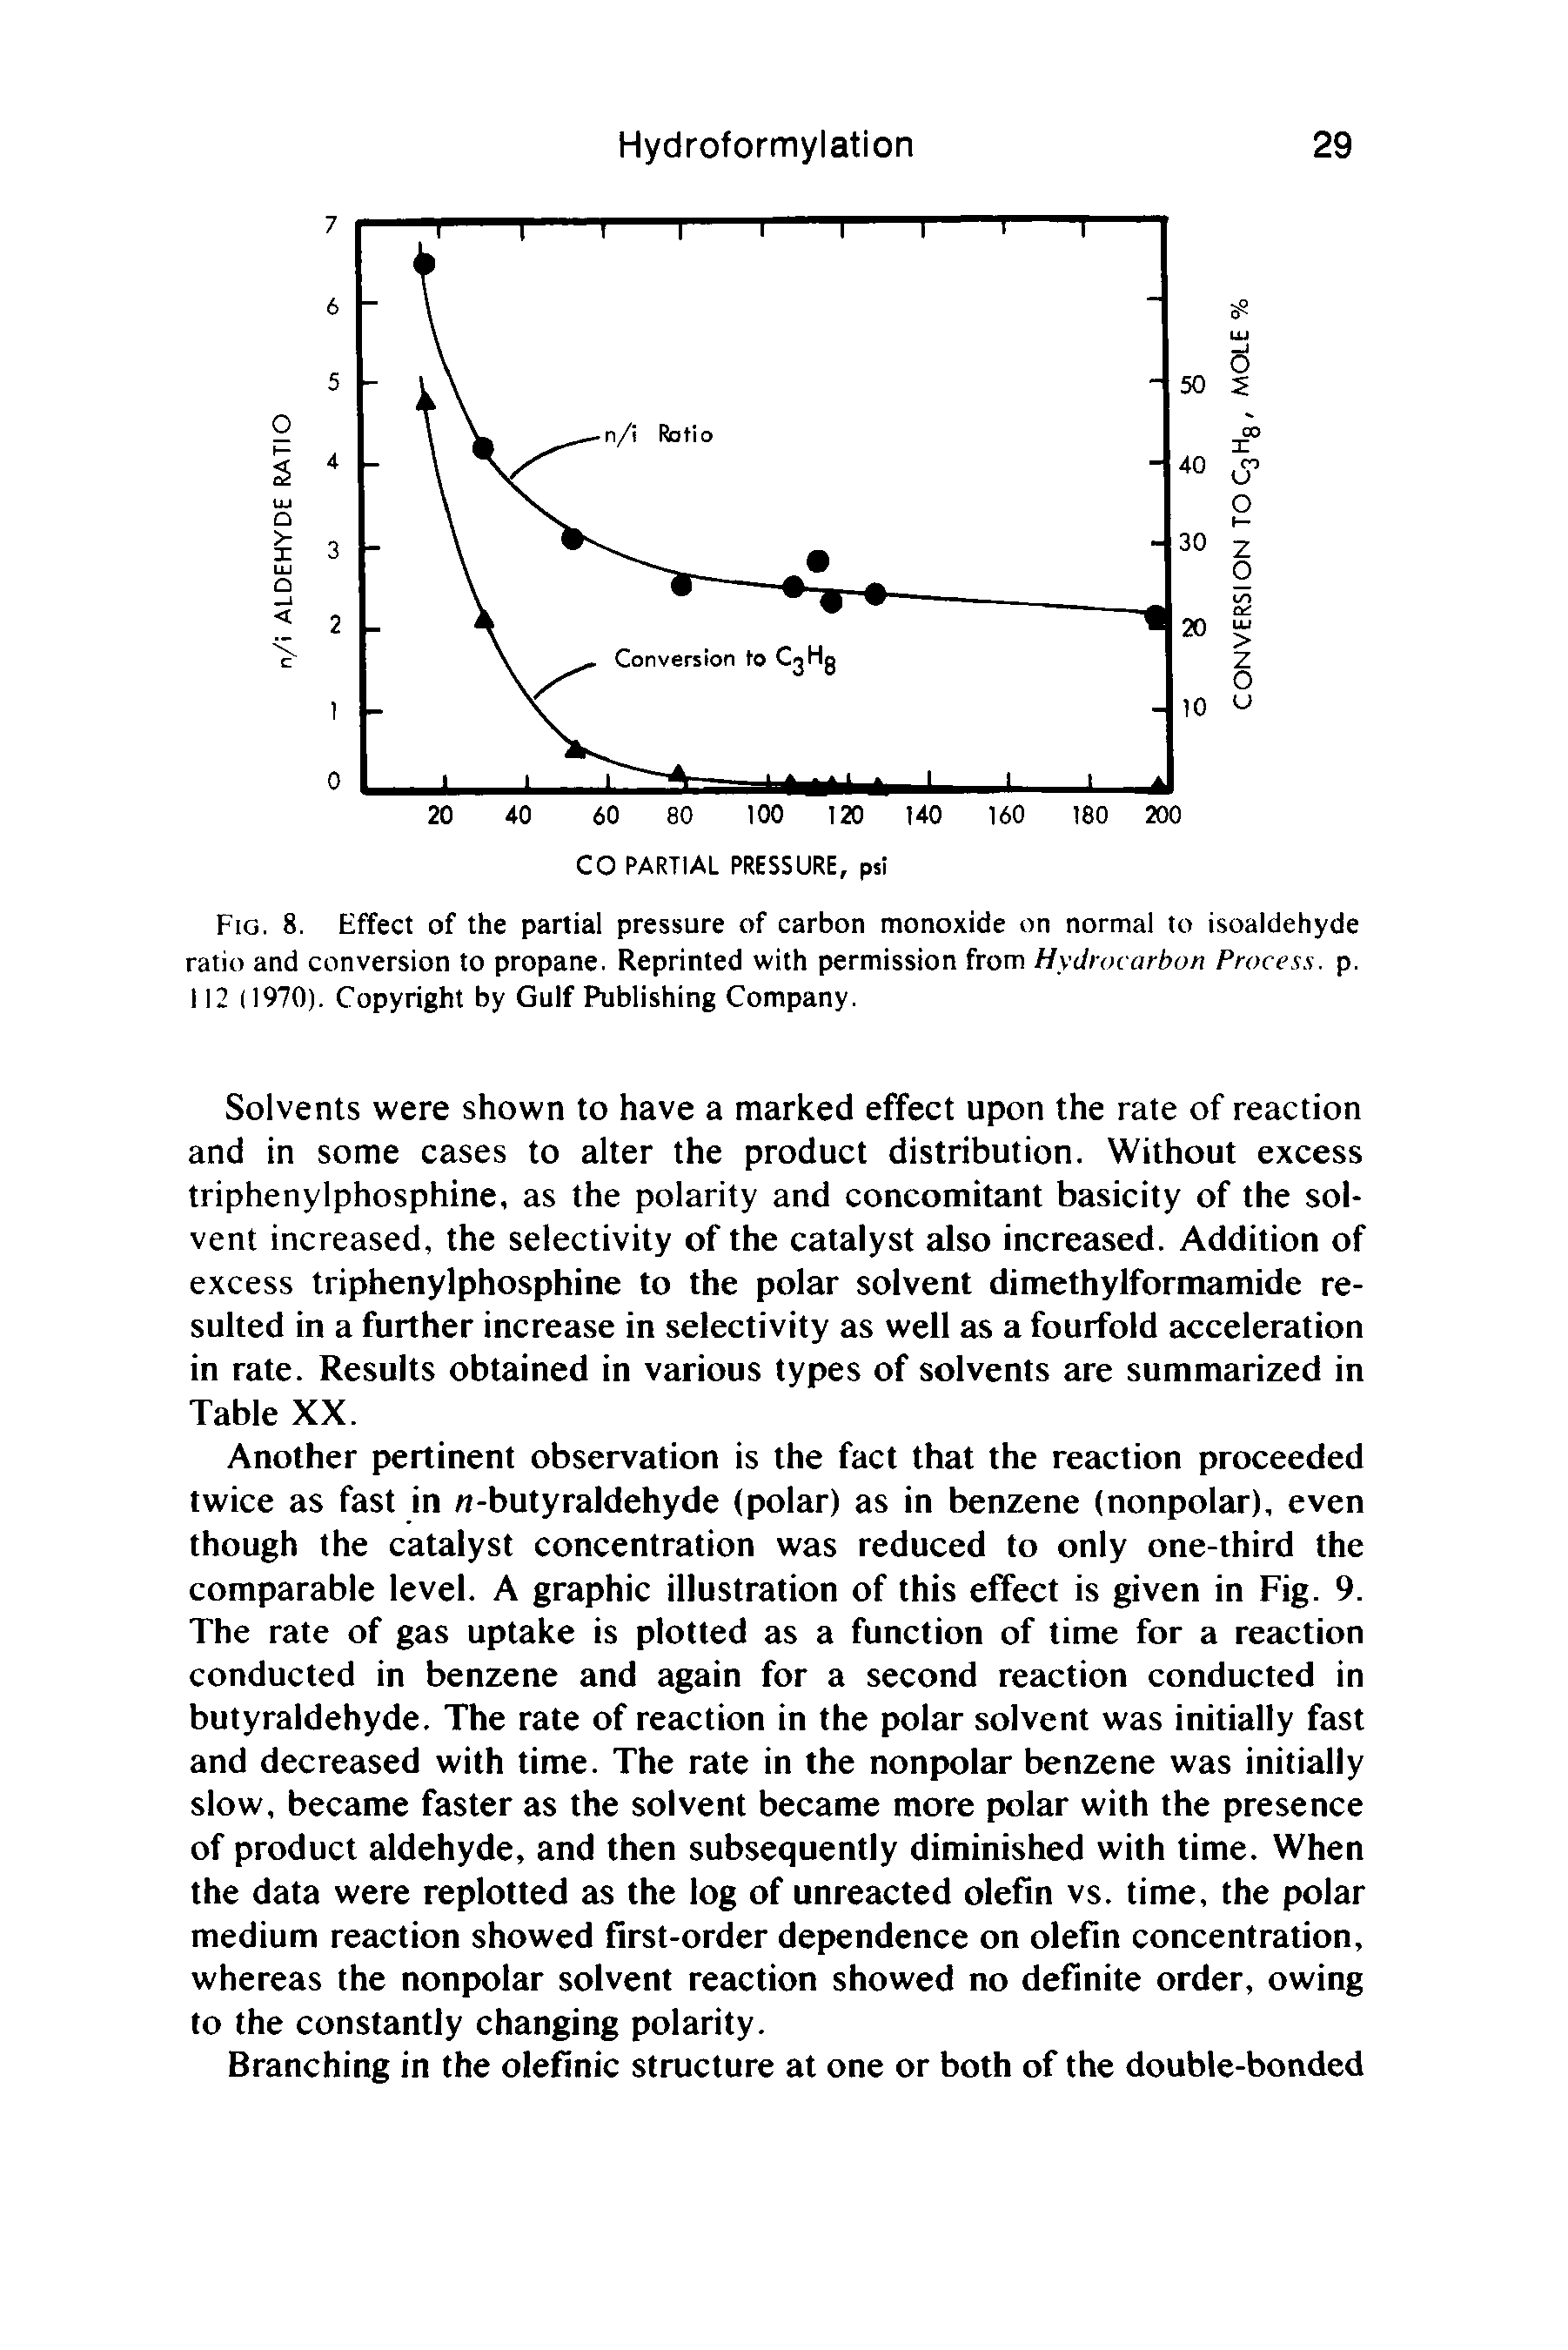 Fig. 8. Effect of the partial pressure of carbon monoxide on normal to isoaldehyde ratio and conversion to propane. Reprinted with permission from Hydrocarbon Process, p. 112 (1970). Copyright by Gulf Publishing Company.